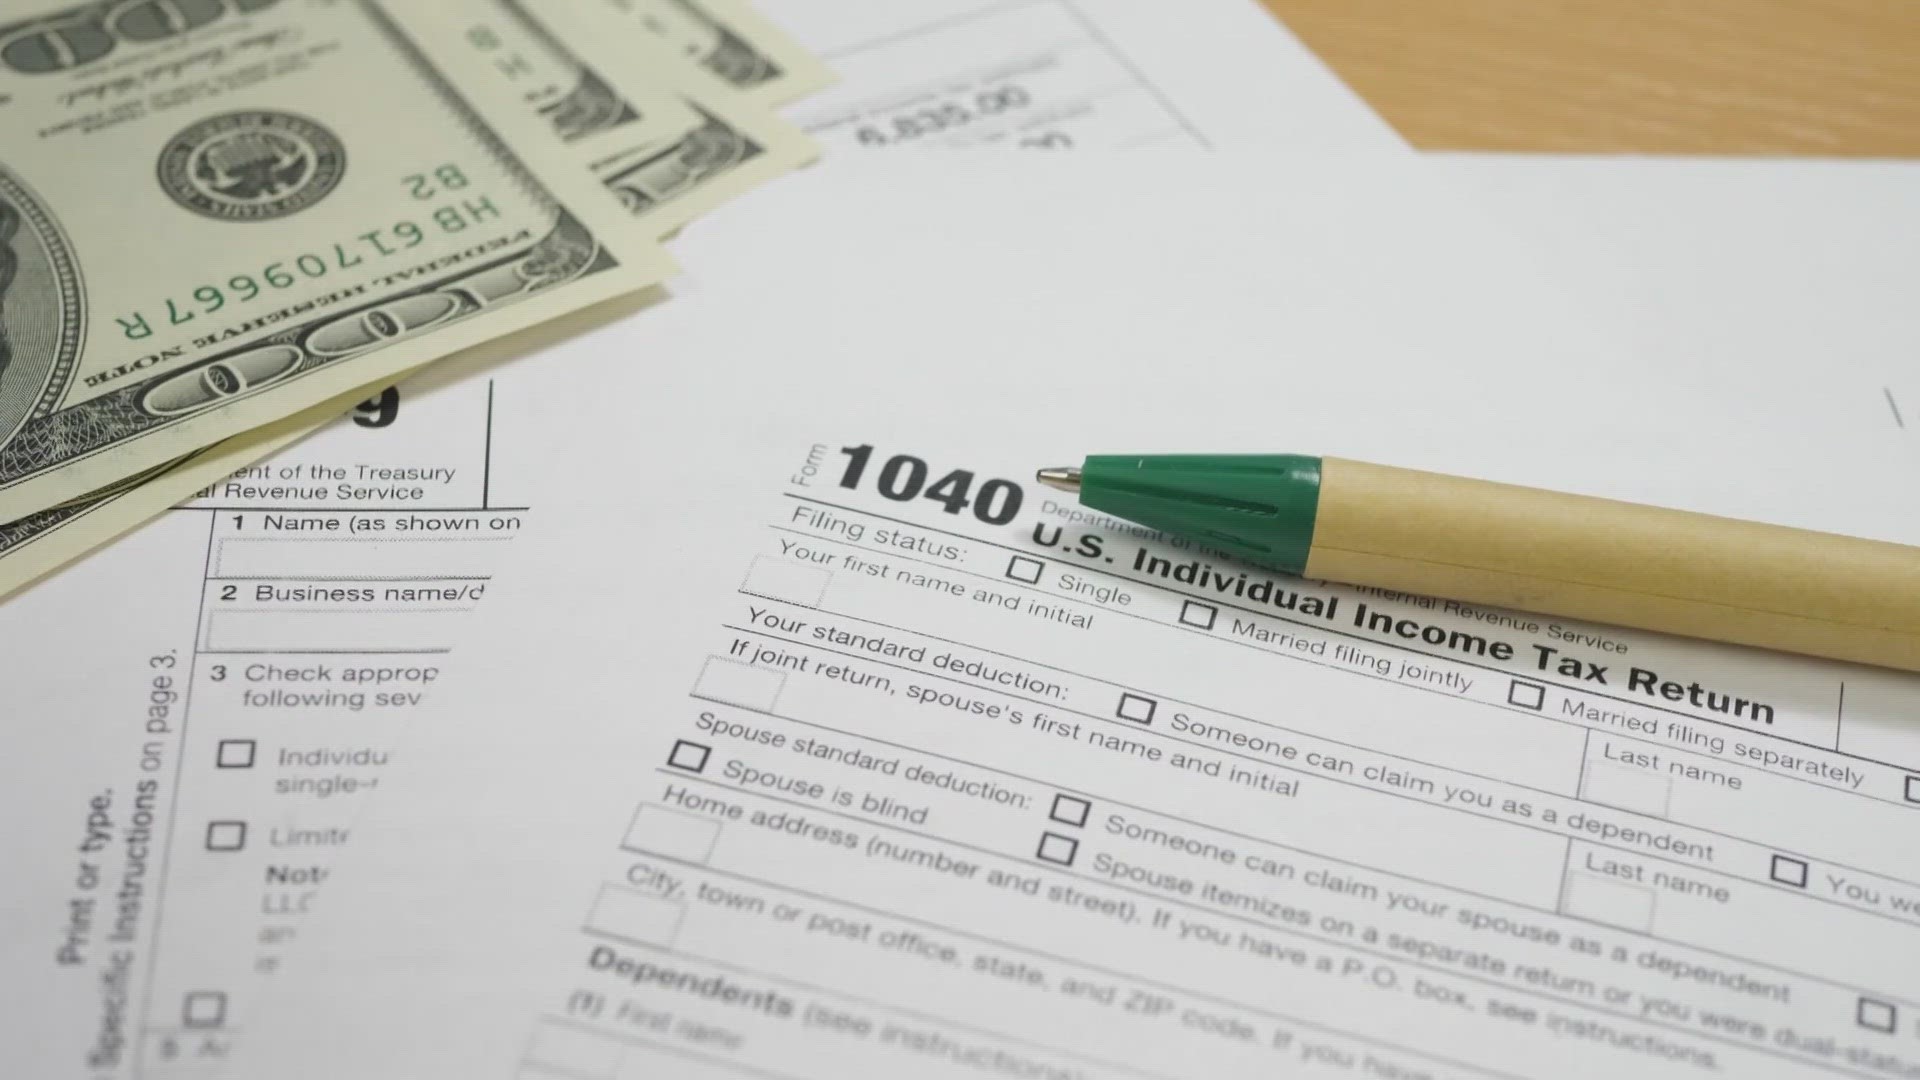 You may notice some changes this year when you file your income tax returns. They could affect what you owe, and if you will or will not get a refund.